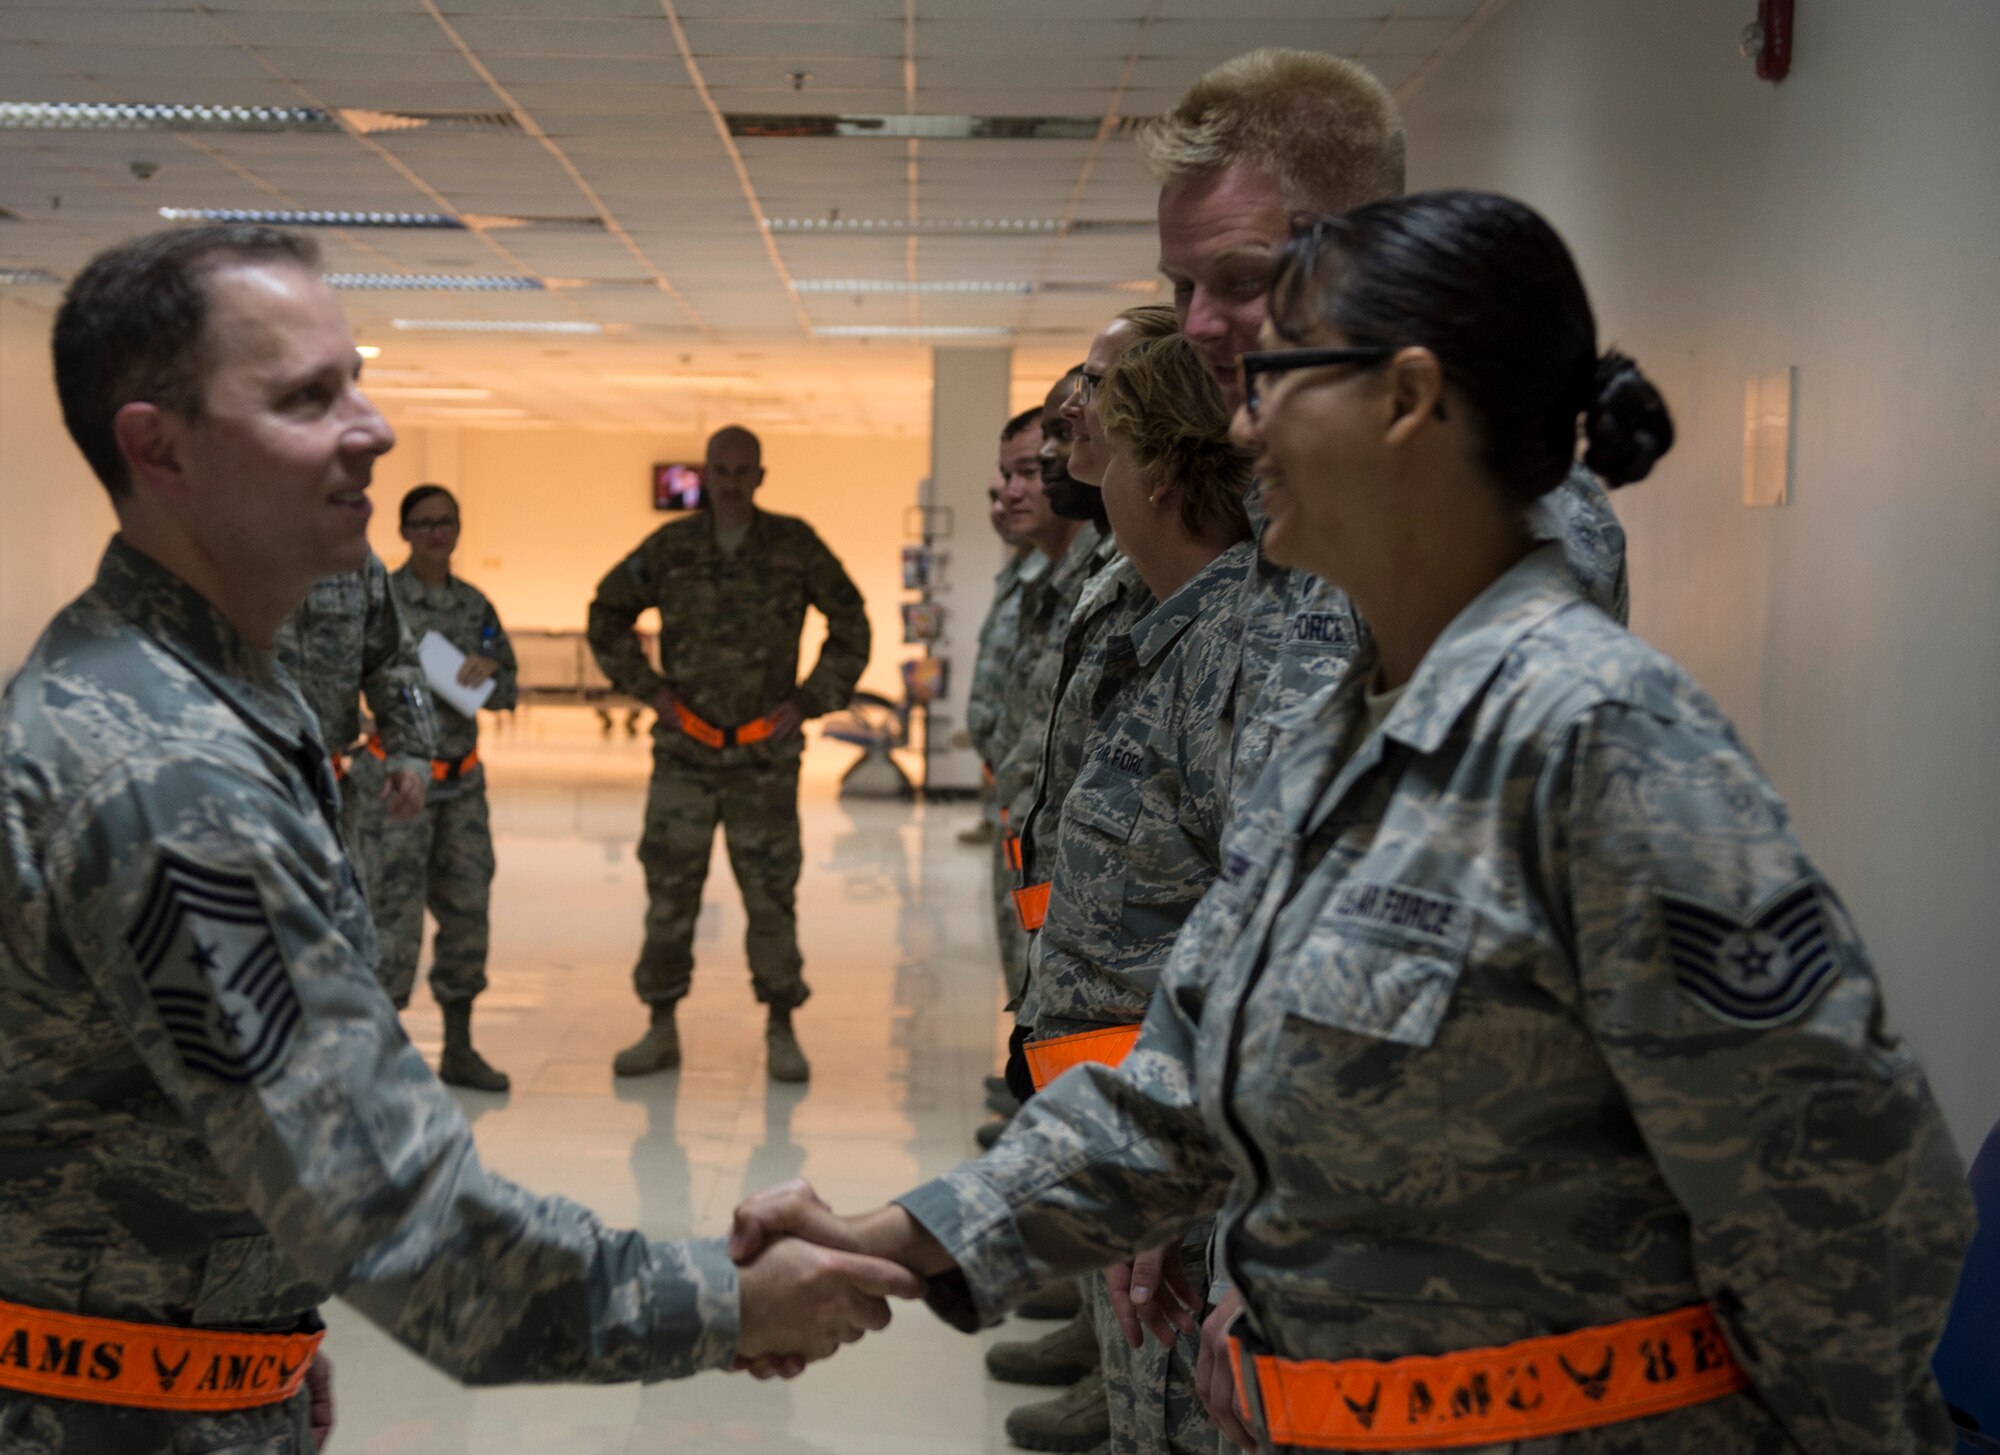 U.S. Air Force Chief Master Sgt. Mark Redden, Command Chief with the 521st Air Mobility Operations Wing at Ramstein Air Force Base, Germany, shakes the hand of a member from the 8th Expeditionary Air Mobility Squadron at Al Udeid Air Base, Qatar, May 6, 2017. Redden was accompanied by Chief Master Sgt. Shelina Frey, Command Chief Master Sergeant for Air Mobility Command and made several stops throughout the 8th Expeditionary Air Mobility Squadron sections, providing an opportunity for Airmen to speak about their duties and ask questions.  (U.S. Air Force photo by Tech. Sgt. Amy M. Lovgren)